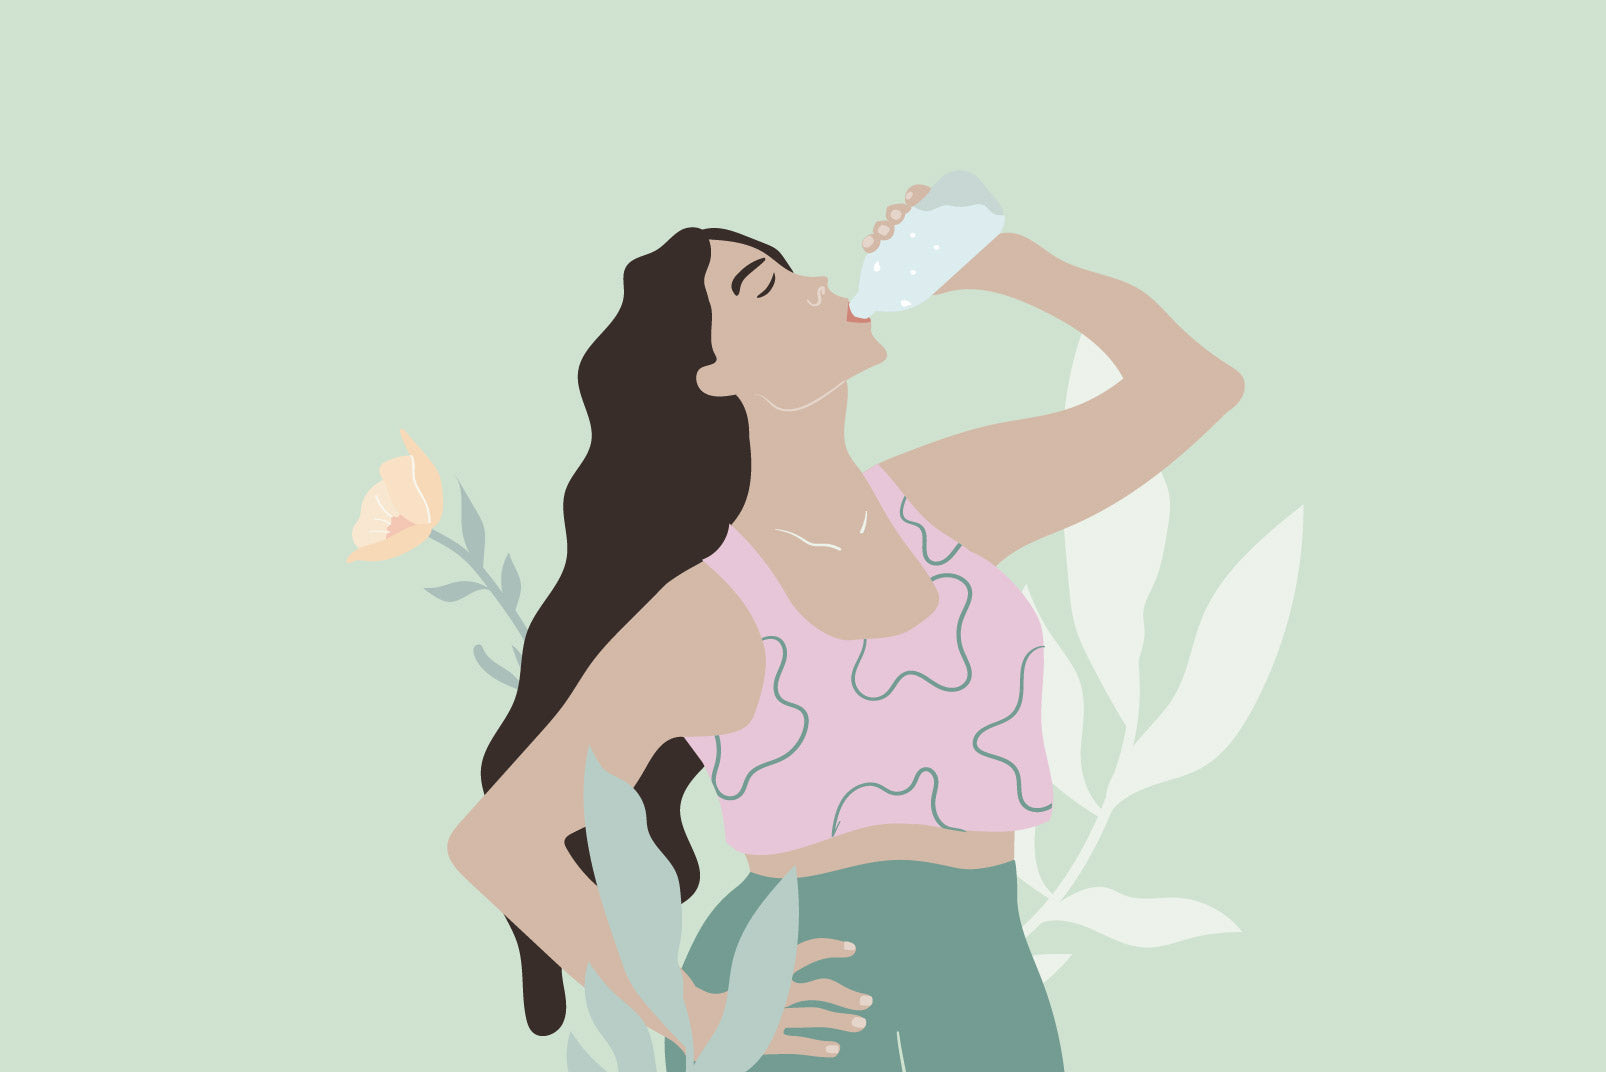 Drawing of a dark haired woman drinking a bottle of water against a green background.